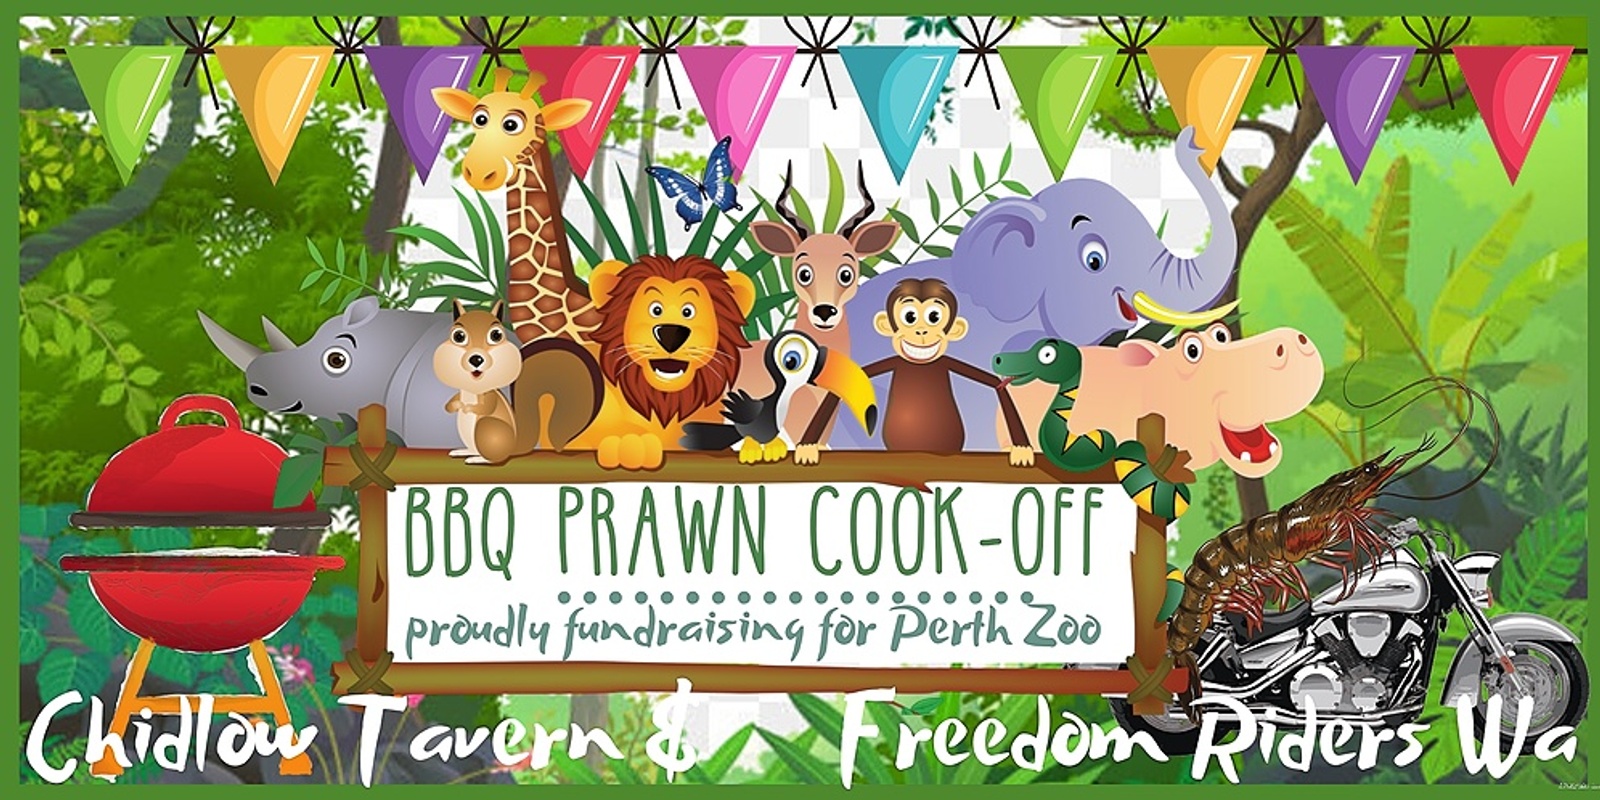 Banner image for BBQ Prawn Cook-Off